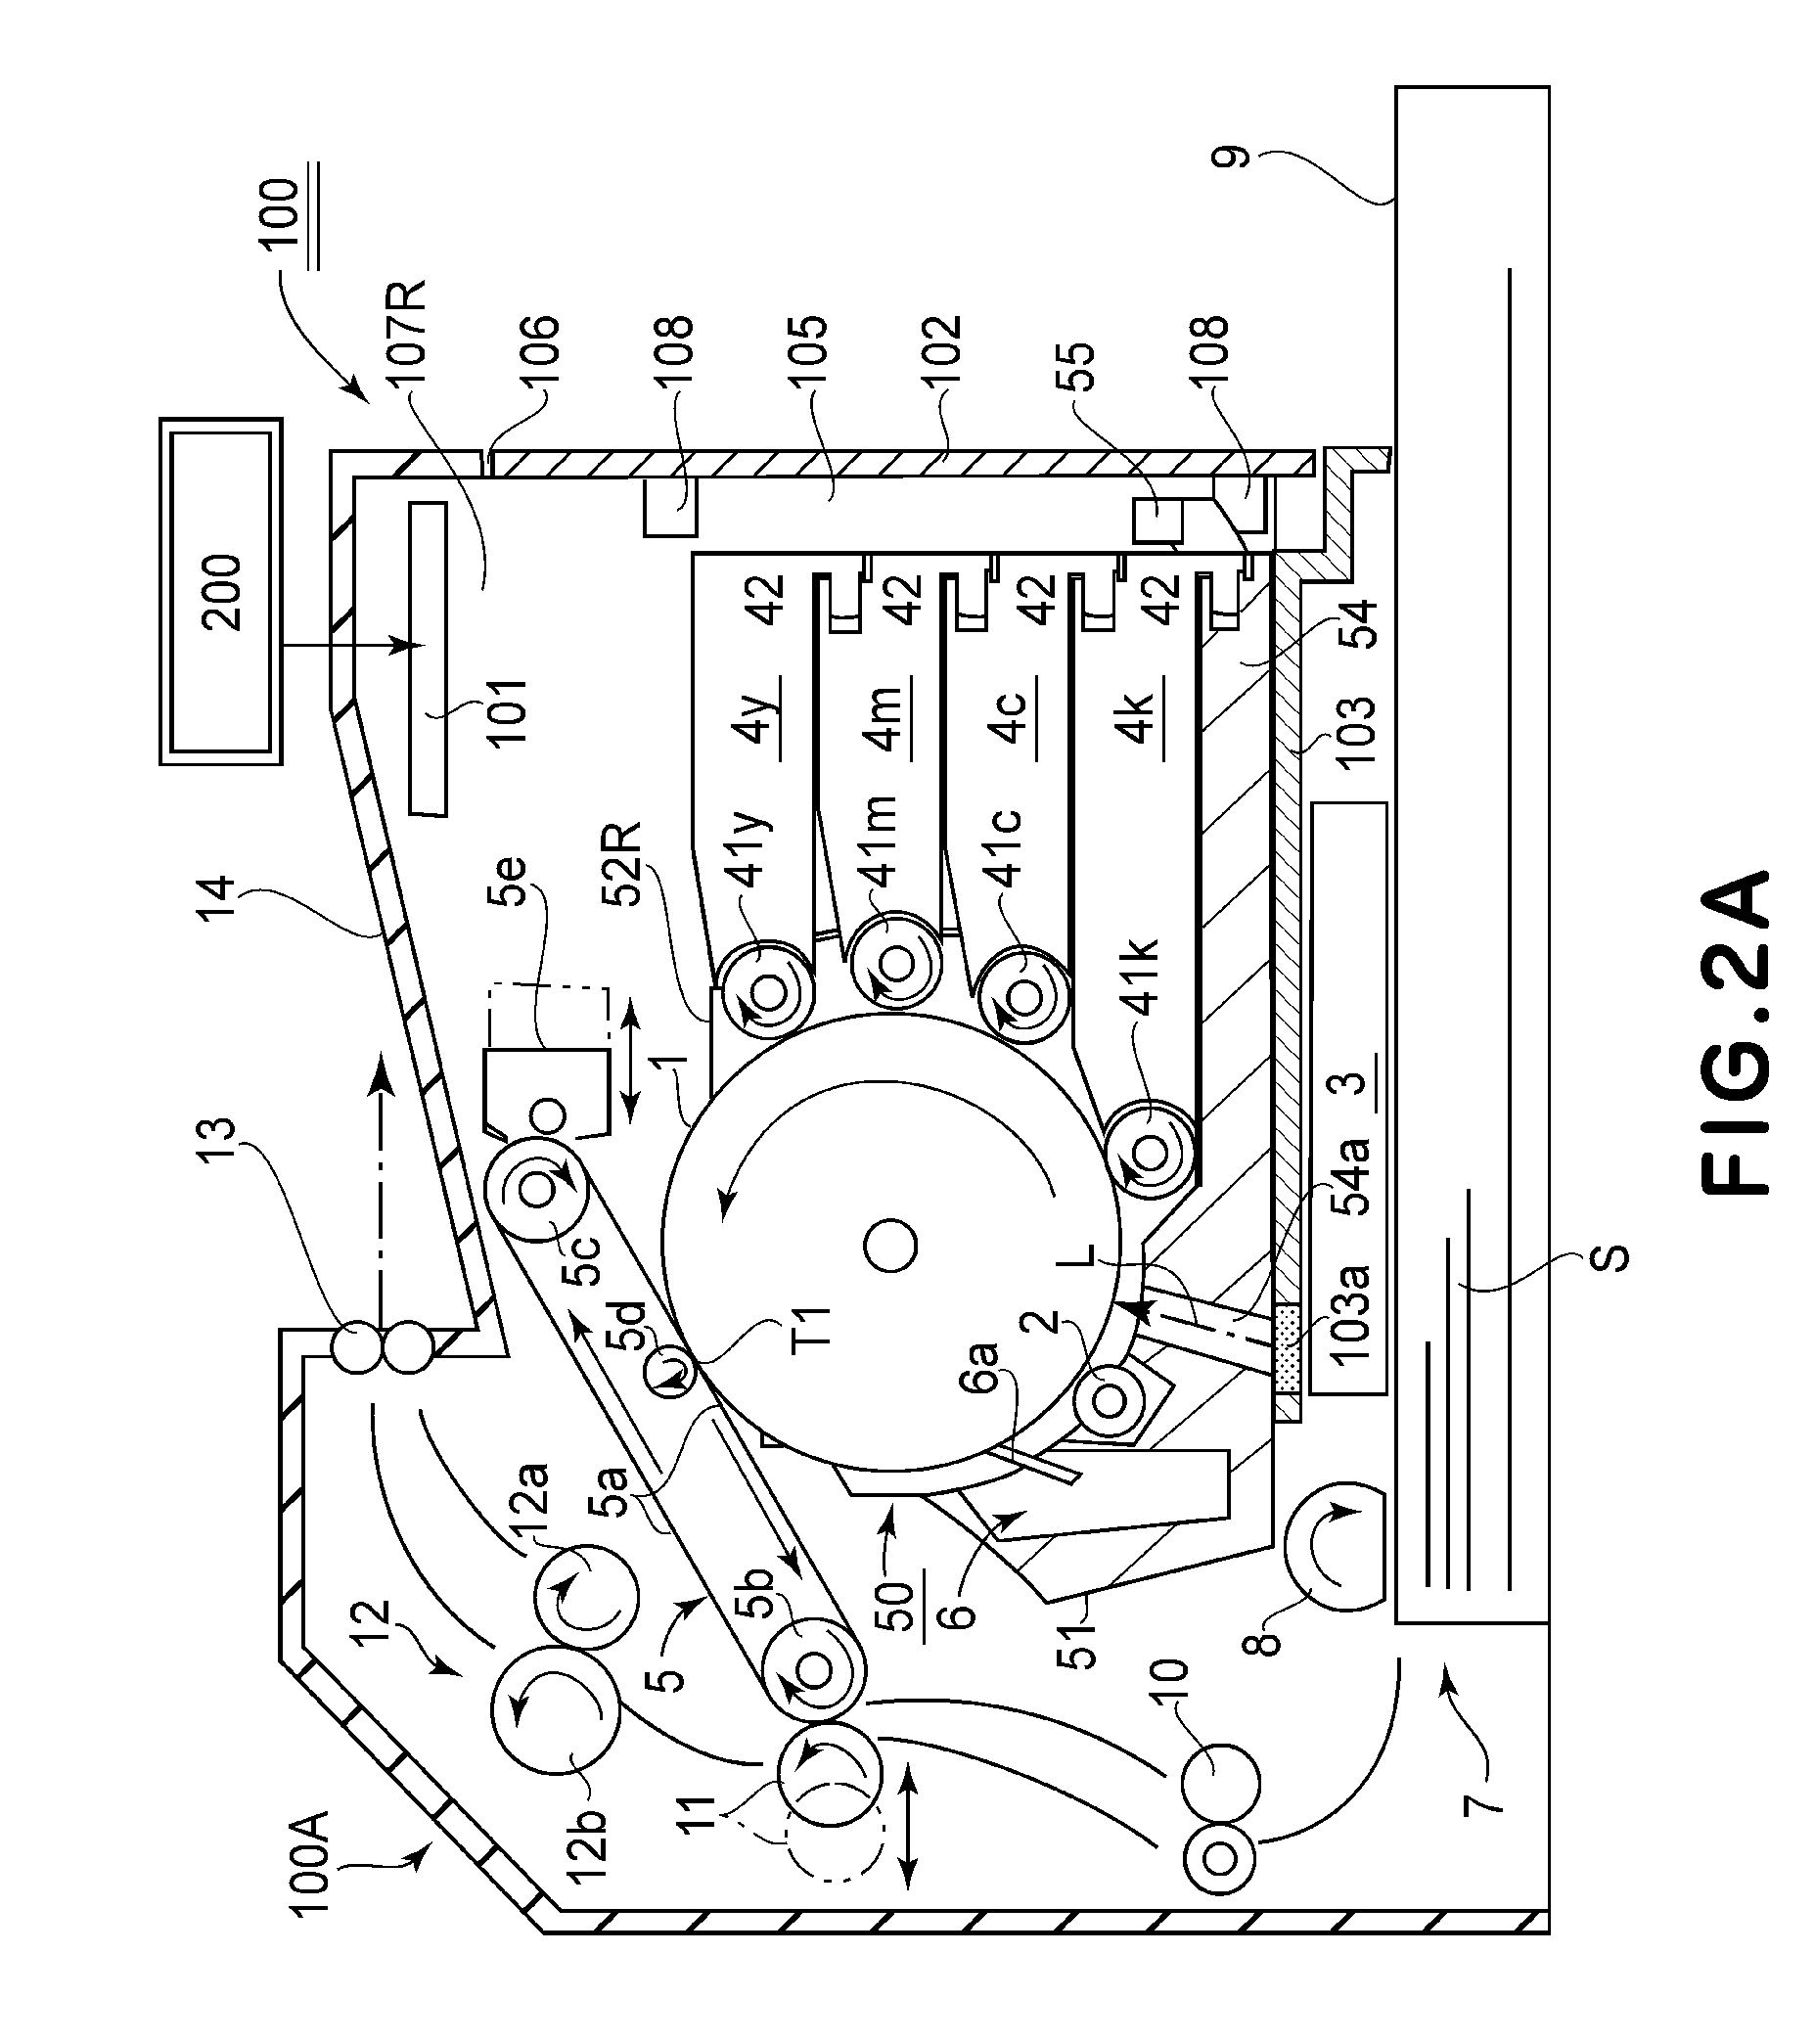 Electrophotographic color image forming apparatus and cartridge